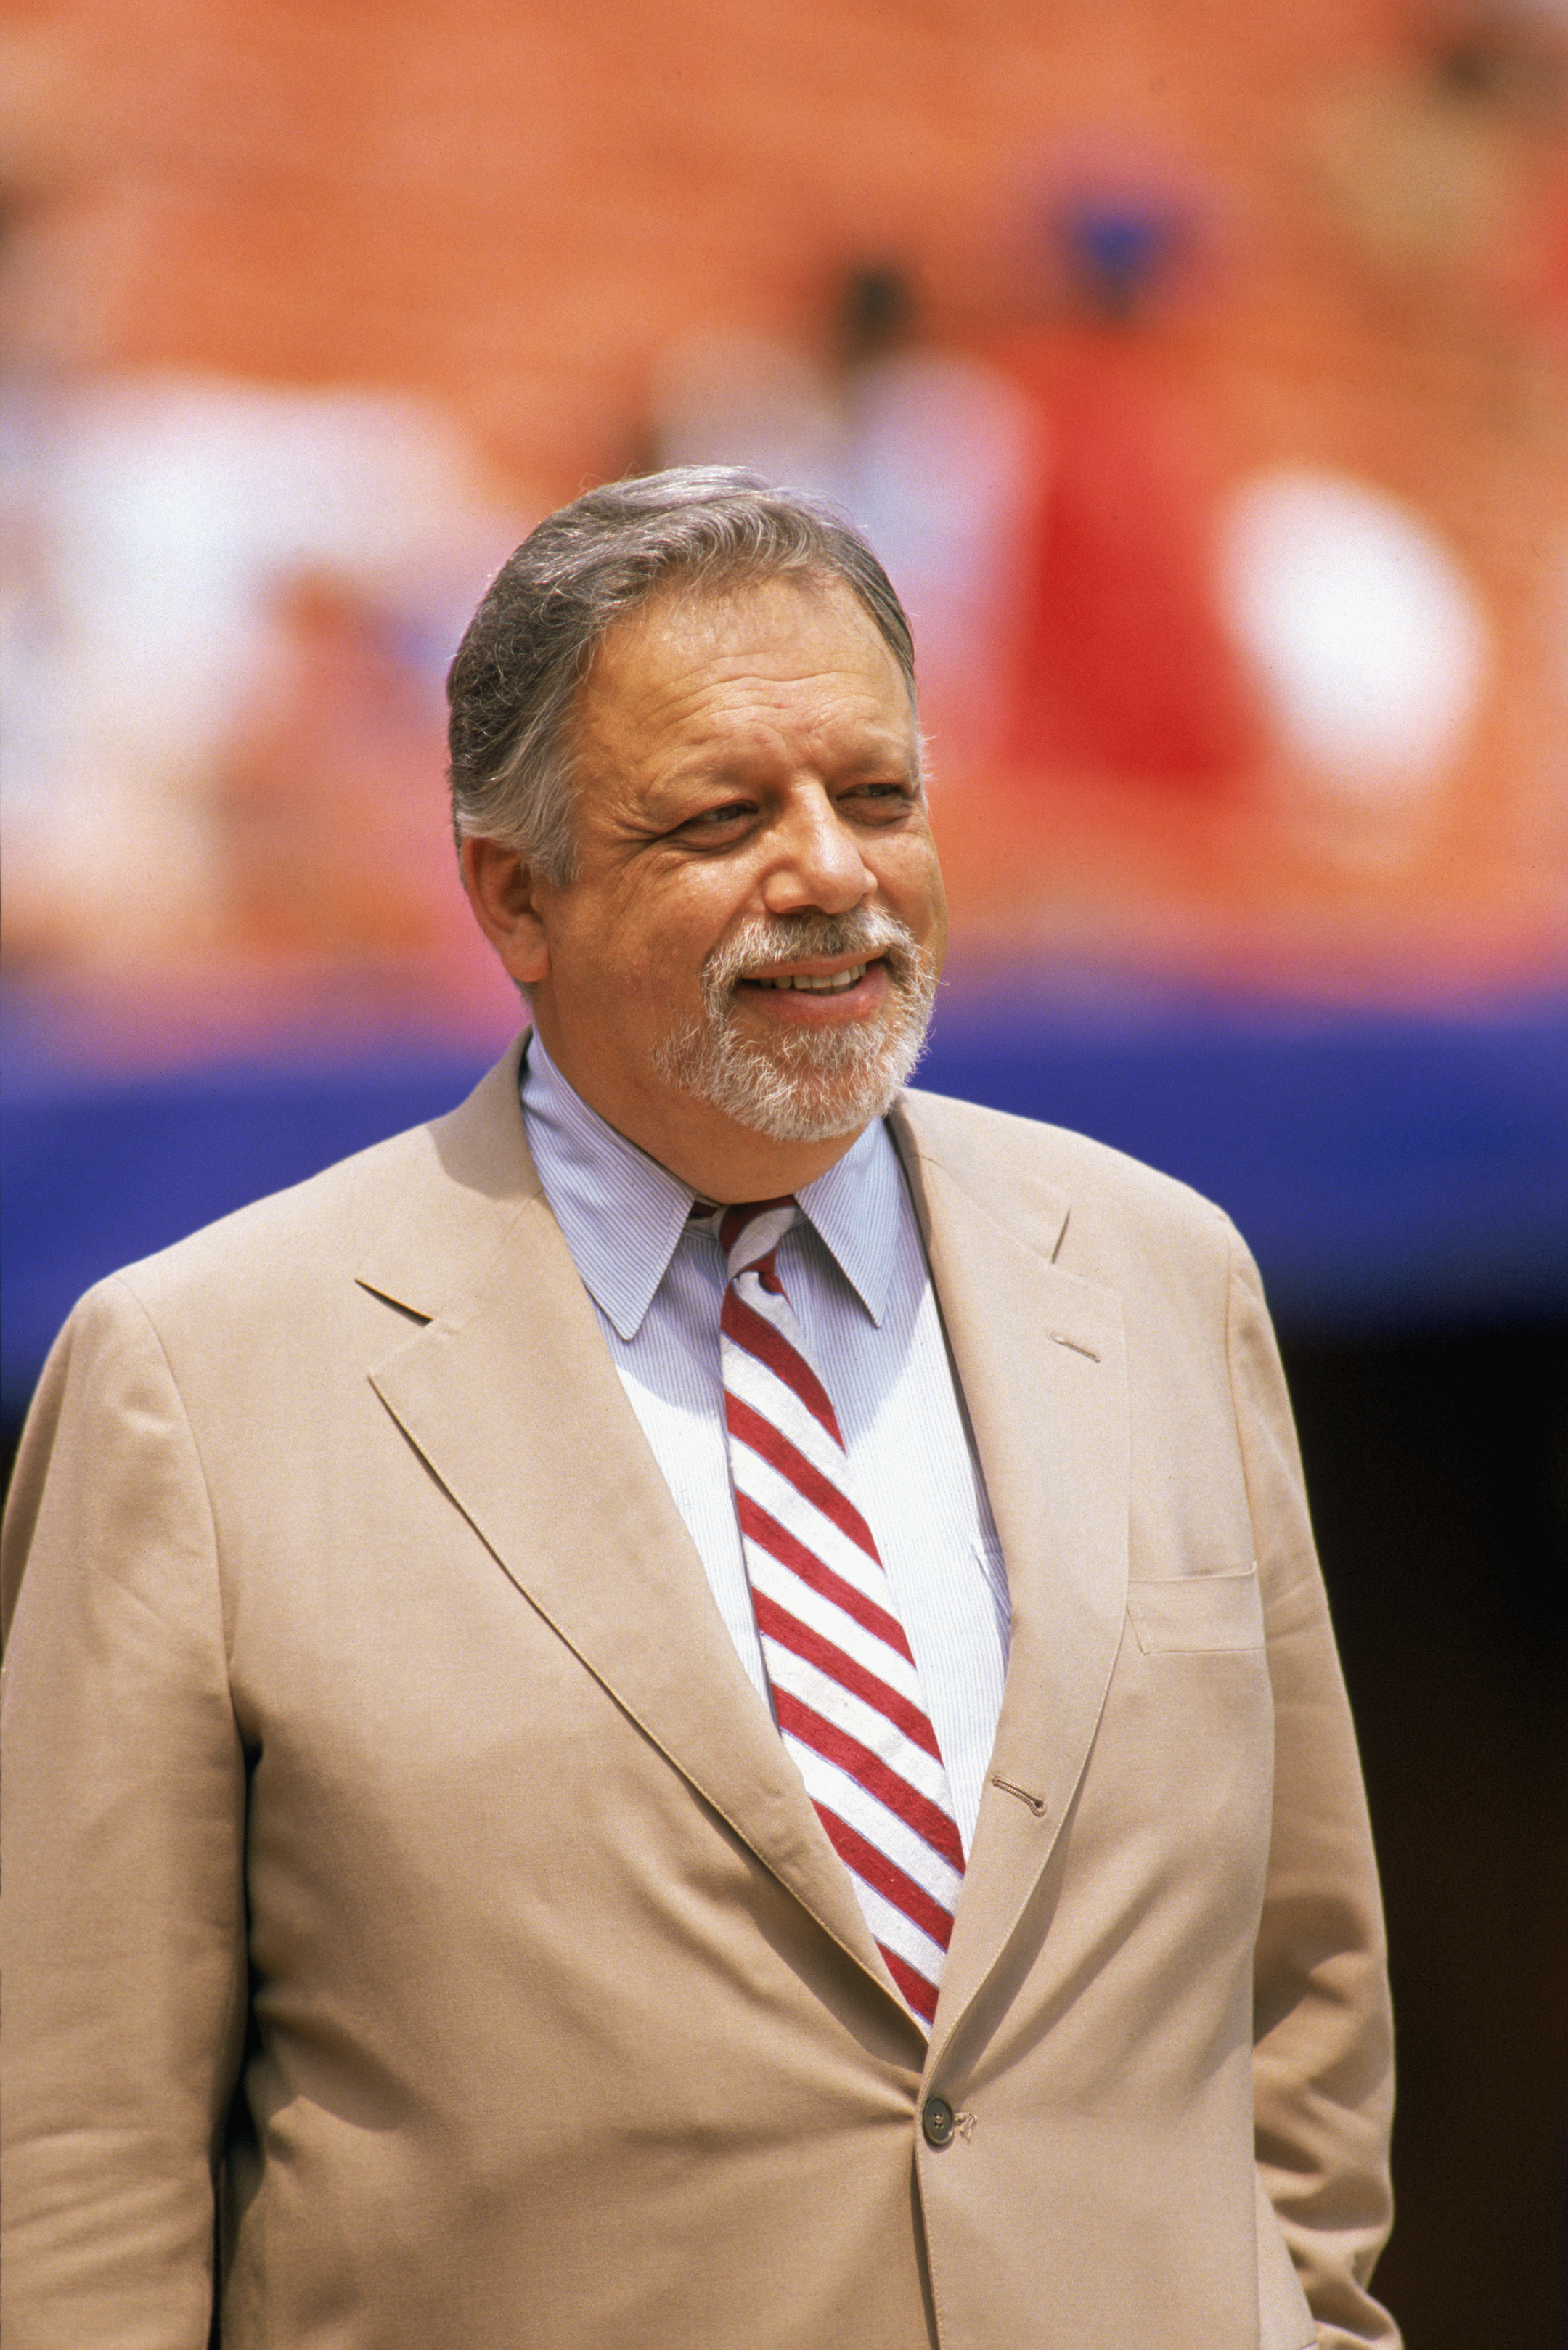 Baseball commissioner A. Bartlett Giamatti standing on a baseball field in a light suit and striped tie